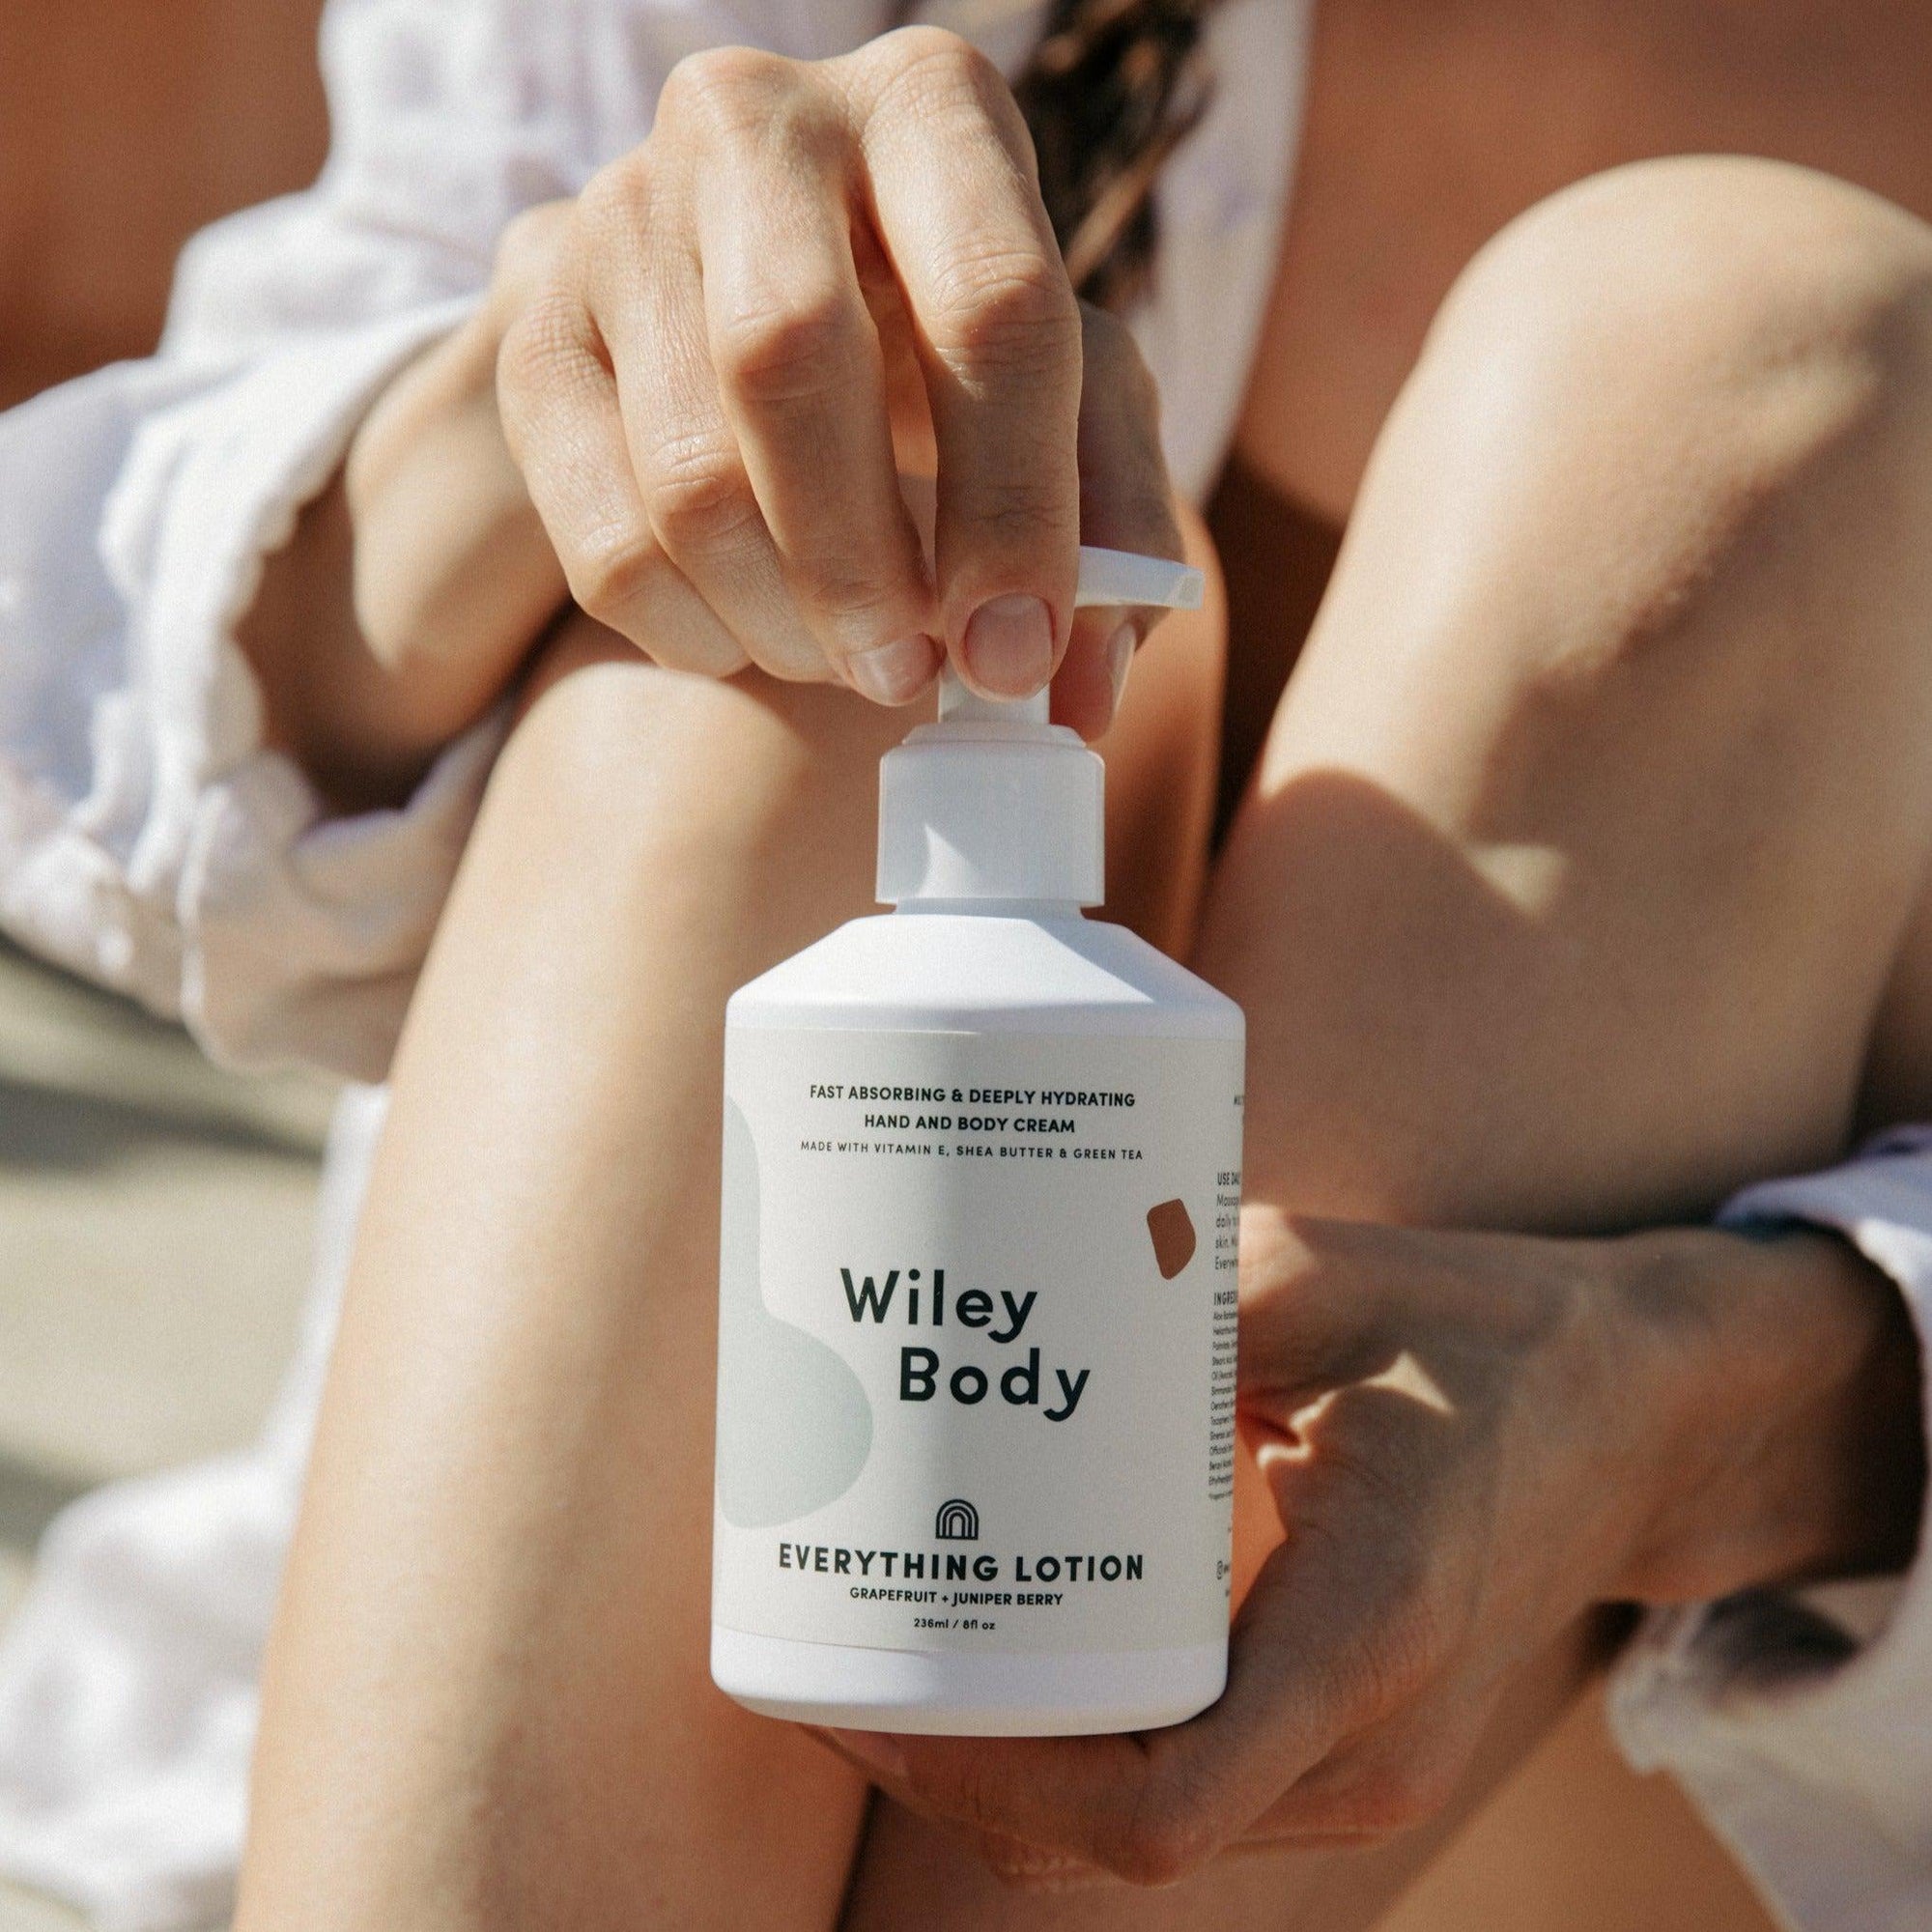 A woman is holding a lightweight bottle of Wiley Body everything lotion for hydrating her skin.